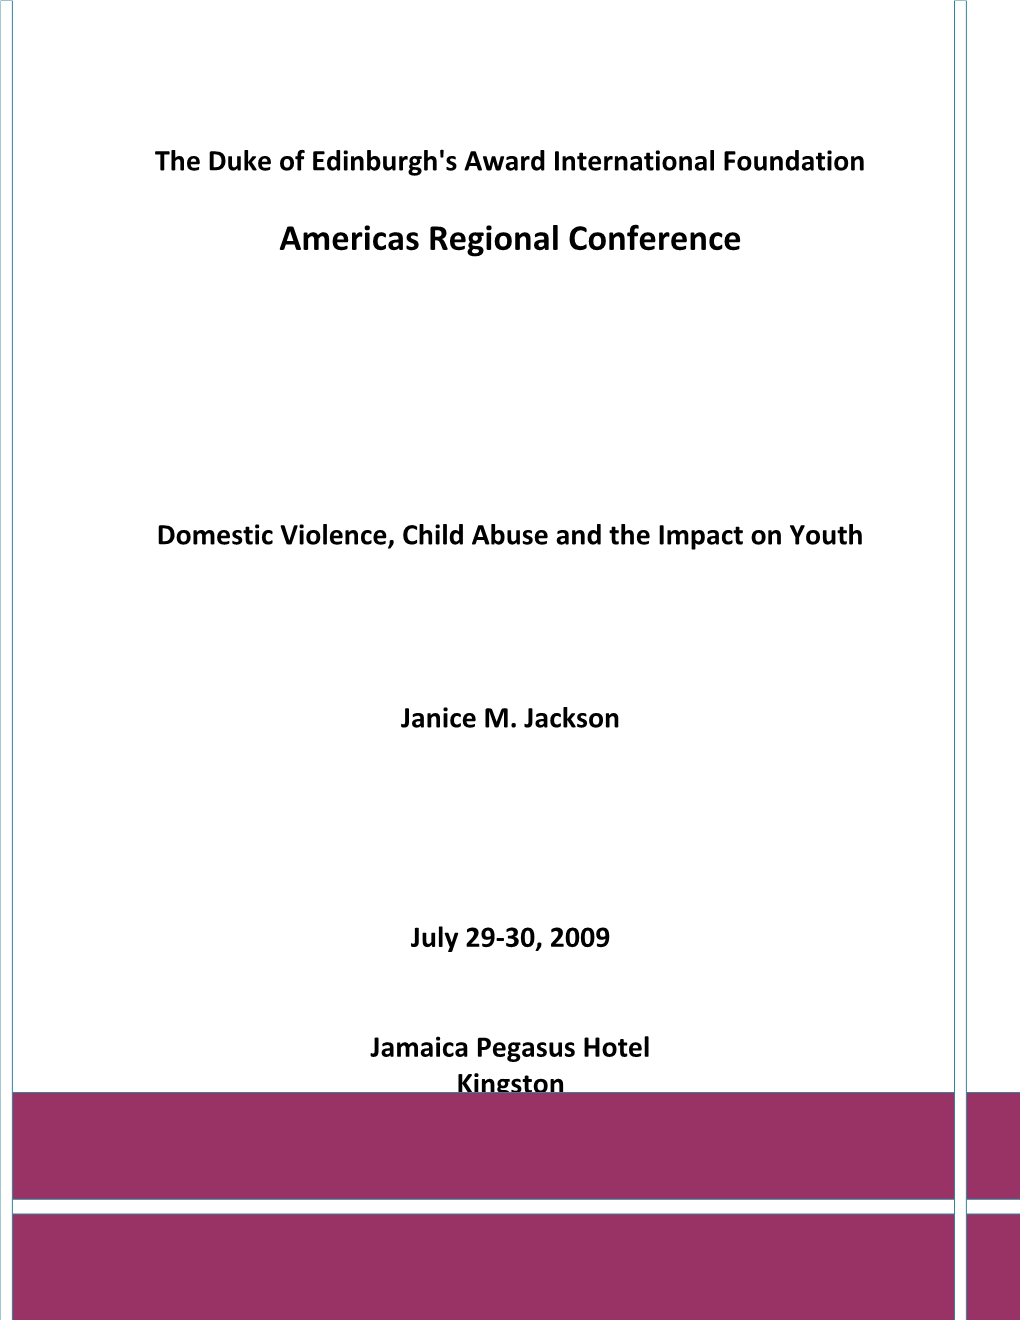 Domestic Violence, Child Abuse and the Impact on Youth